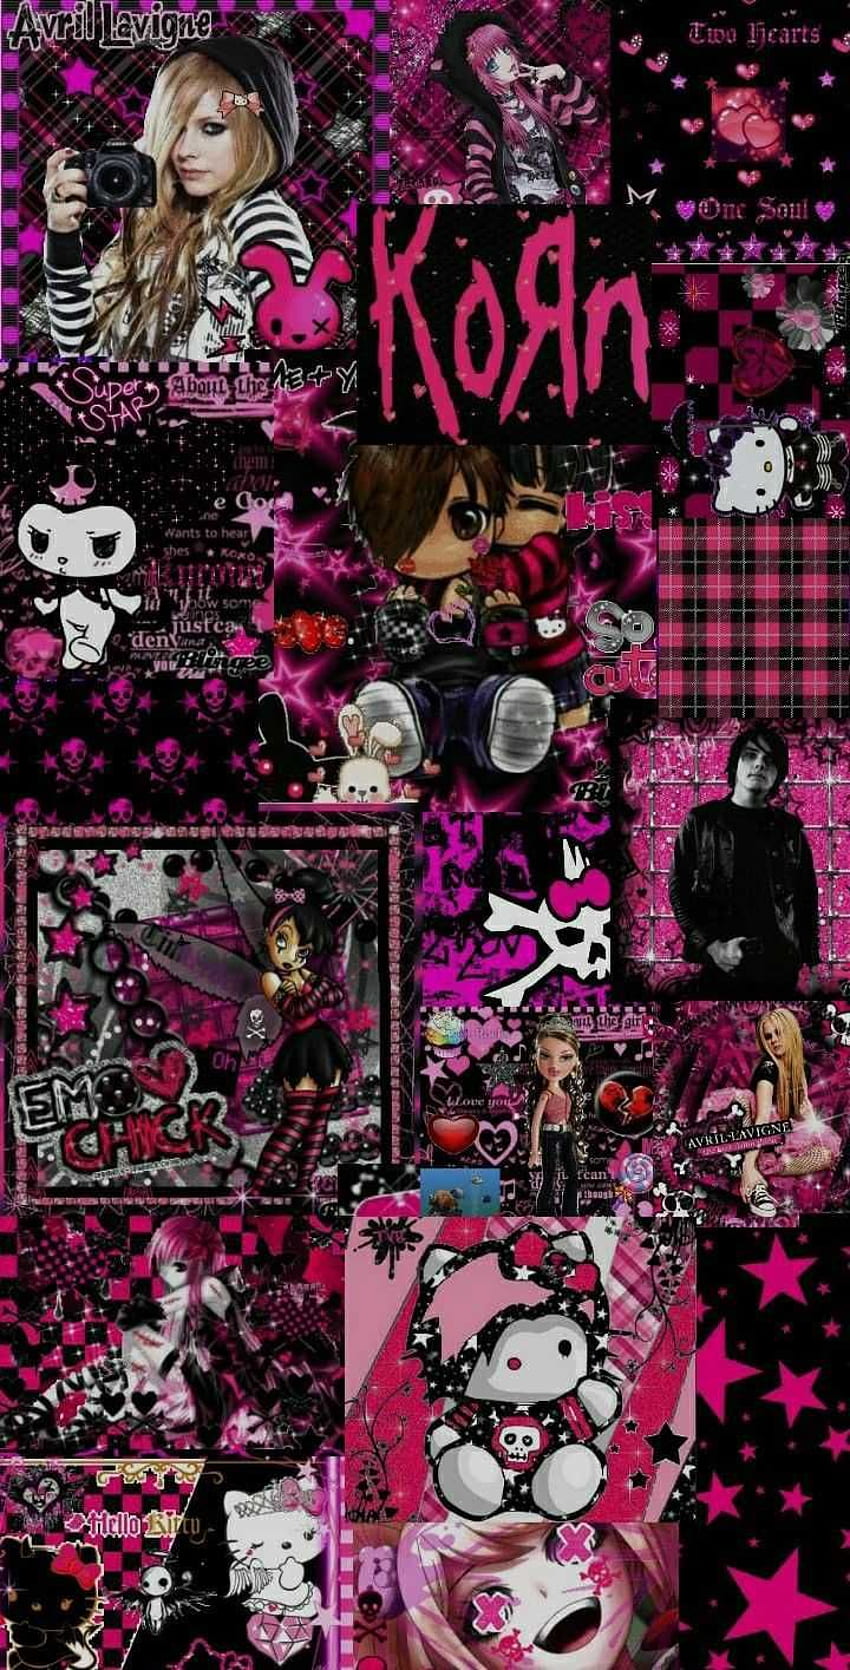 Aesthetic Goth Discover More Emo, Goth, Gothic. 88215 Ae In 2021. Emo, Goth, Hello Kitty iPhone, Cute Emo HD phone wallpaper